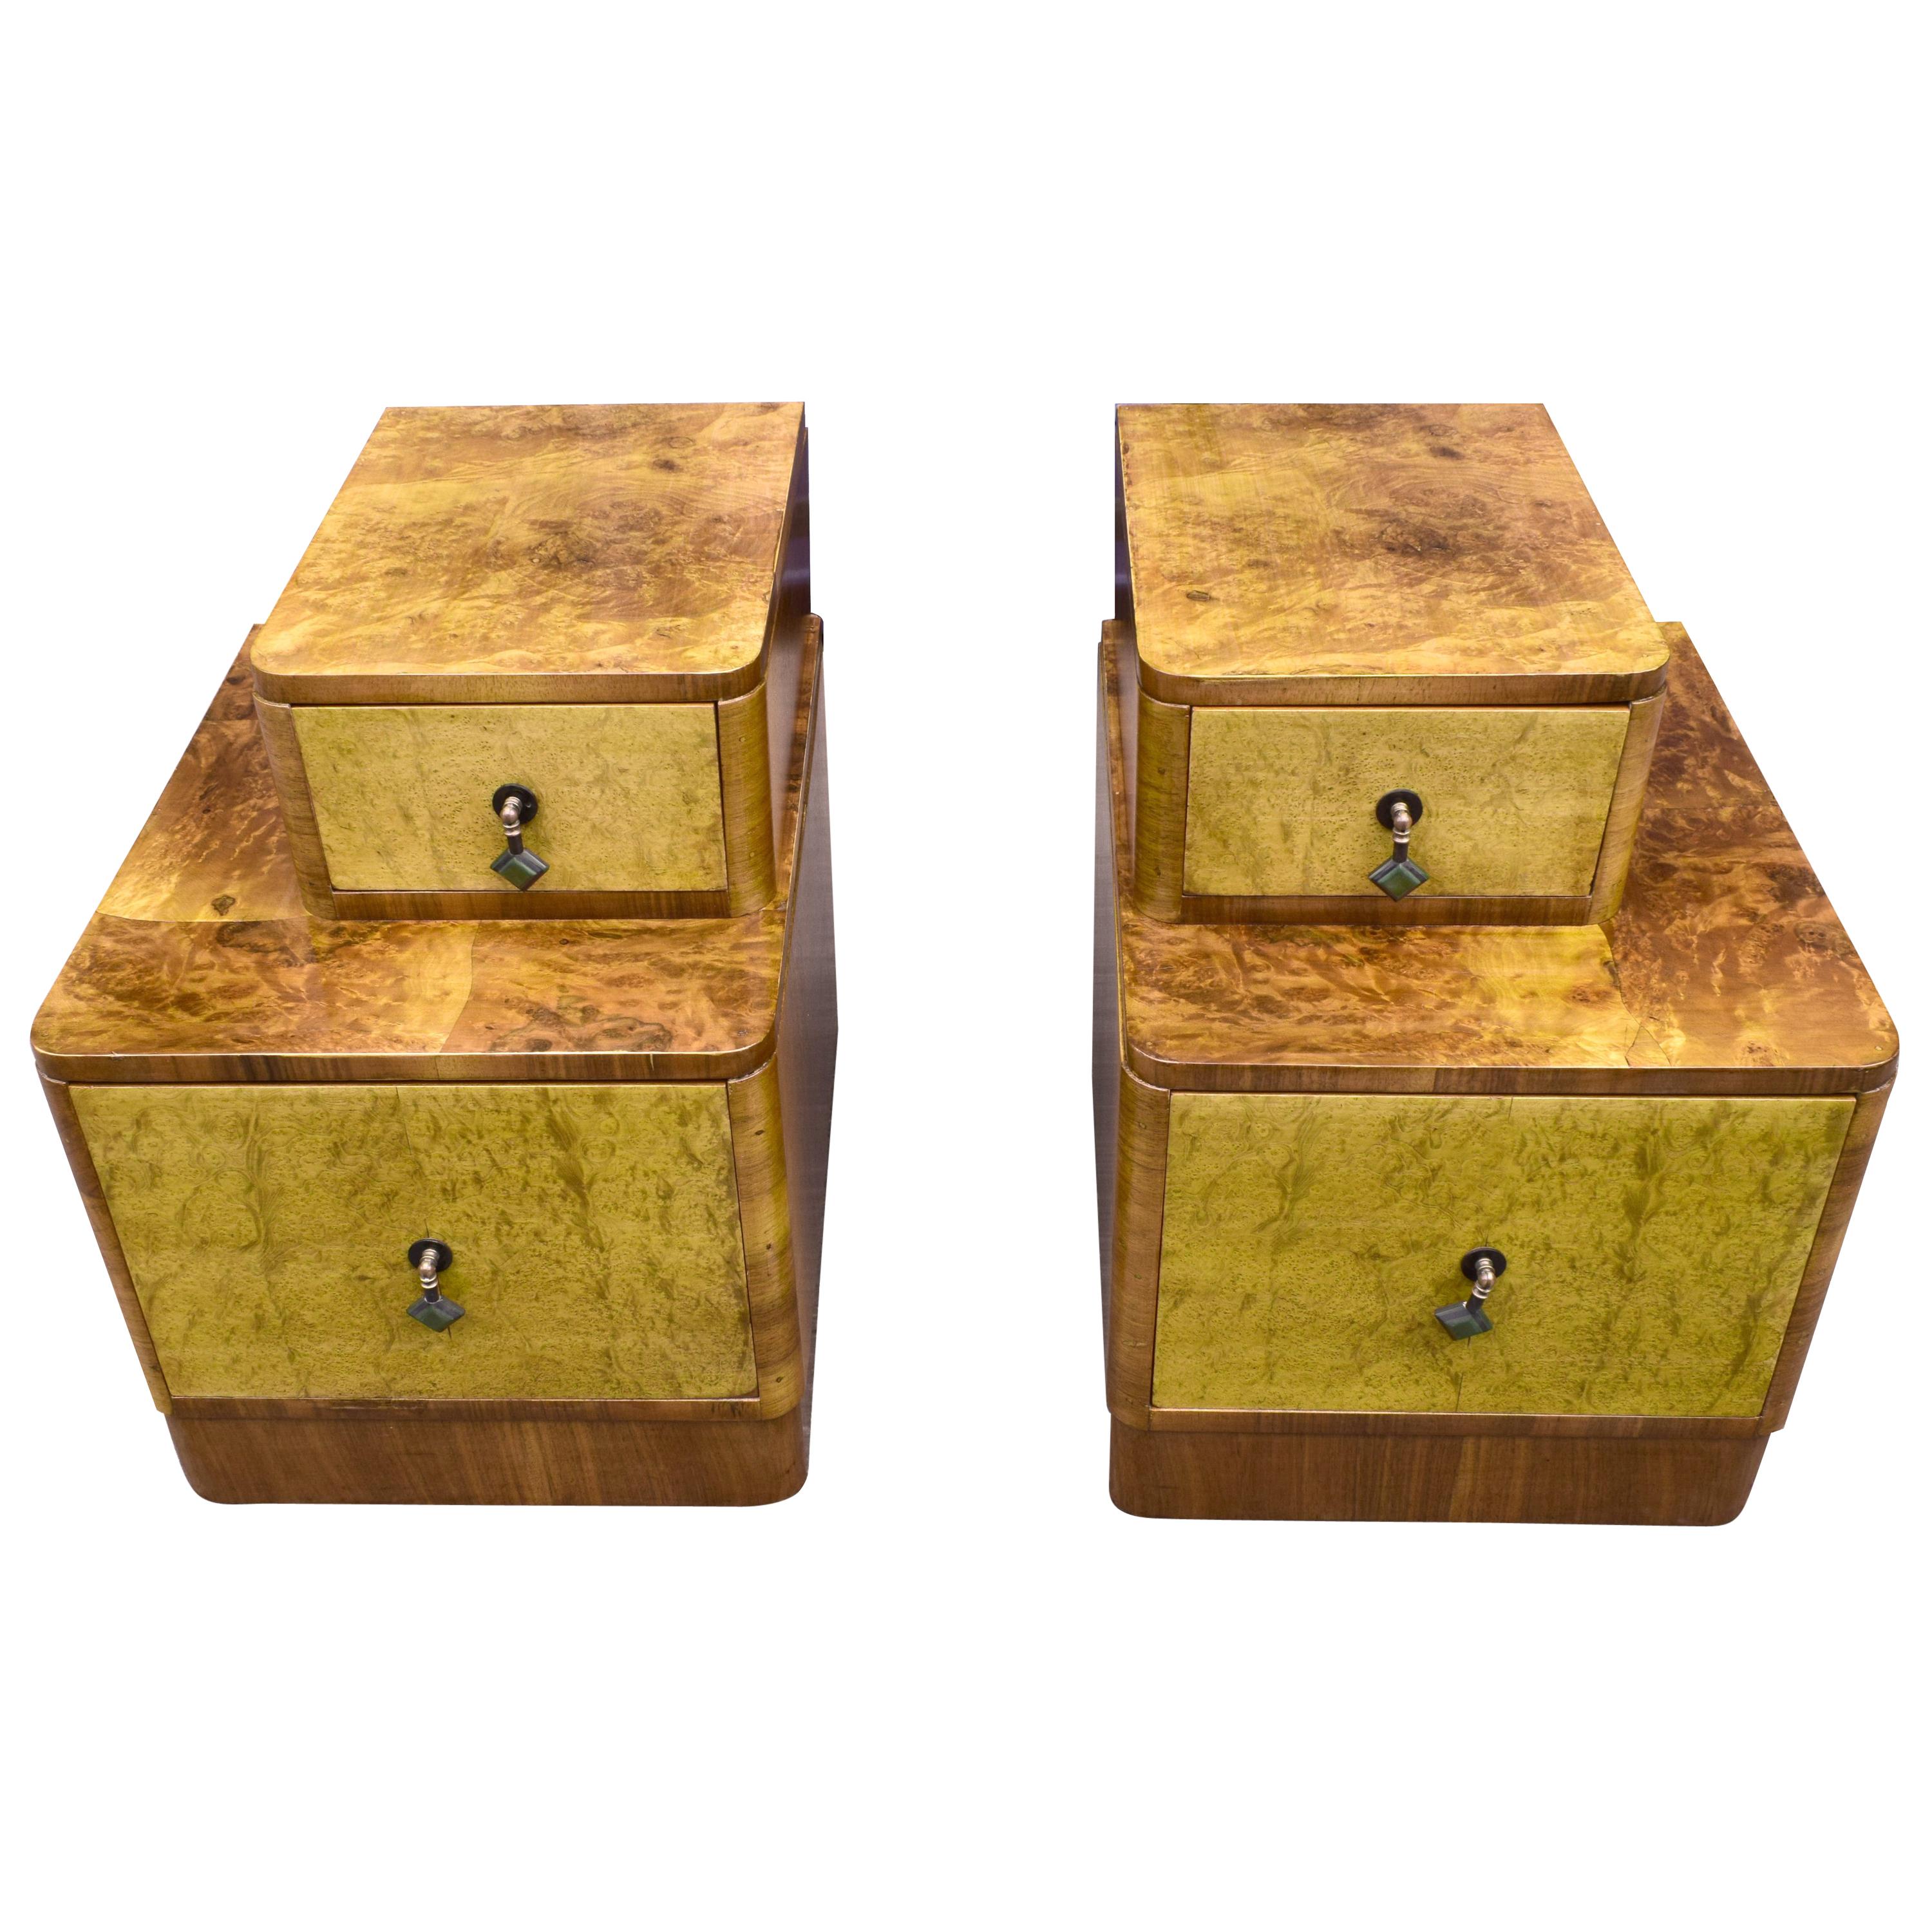 Matching Pair of Art Deco Stepped Bedside Nightstands, circa 1930s, England